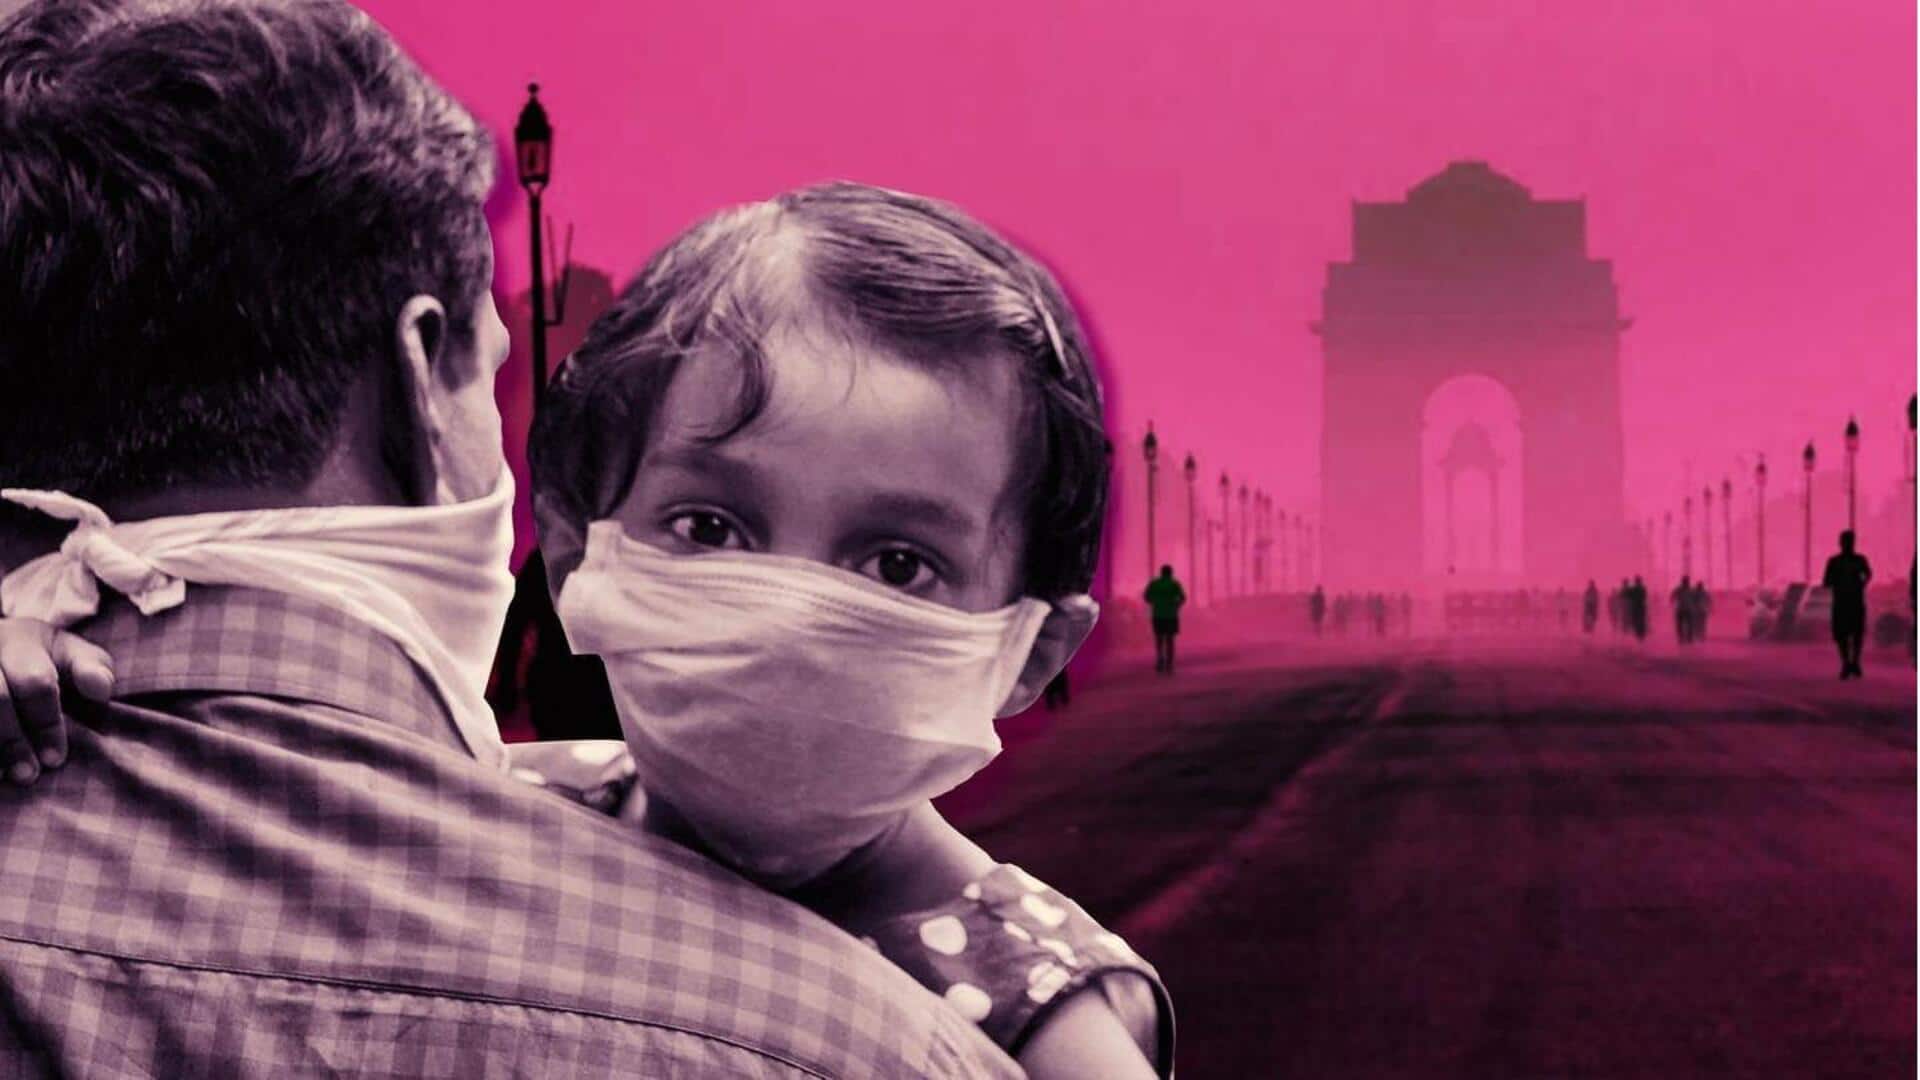 Delhi's AQI may touch 'poor' category by Saturday: Report